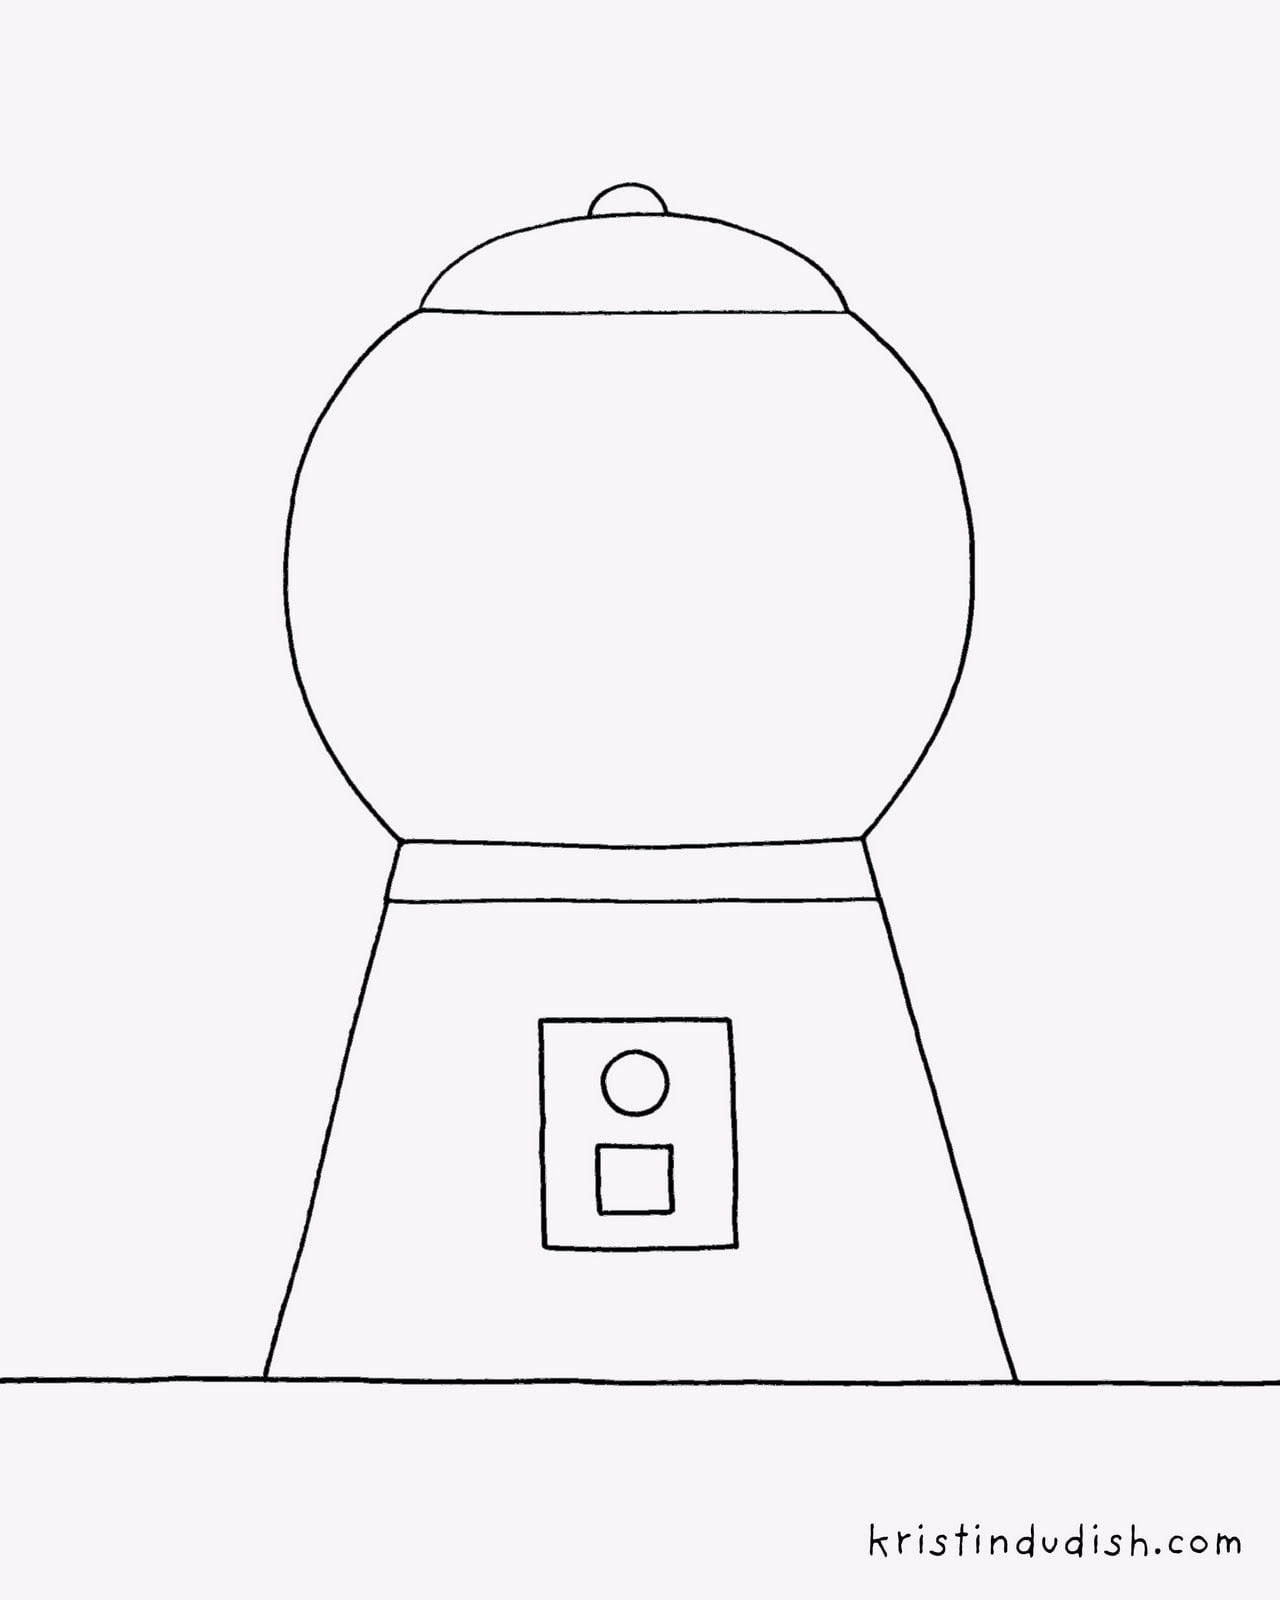 Gumball Machine Template Search myway Gumball Machine Gumball Bubble Gum Machine